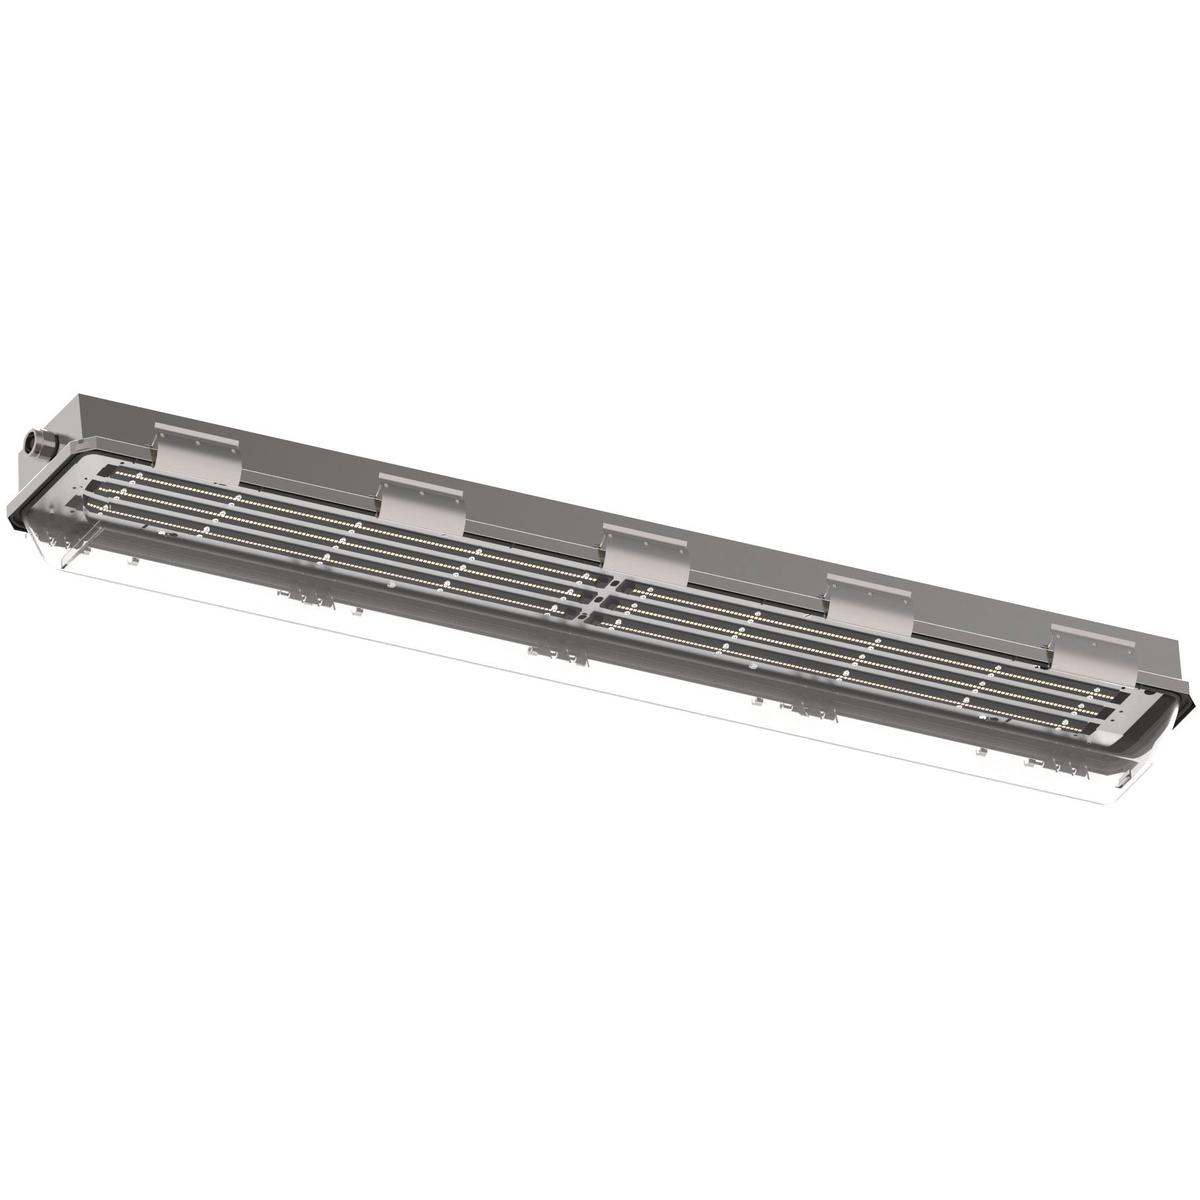 Hubbell LZ2SL5534 LZ2SL Series Linear LED fixtures are made of a 316 Stainless Steel body with an impact resistant polycarbonate lens and use energy efficient LED's  that are suitable for use in harsh and hazardous environments.  ; Supplemental 20KA/10KV Surge Protection i